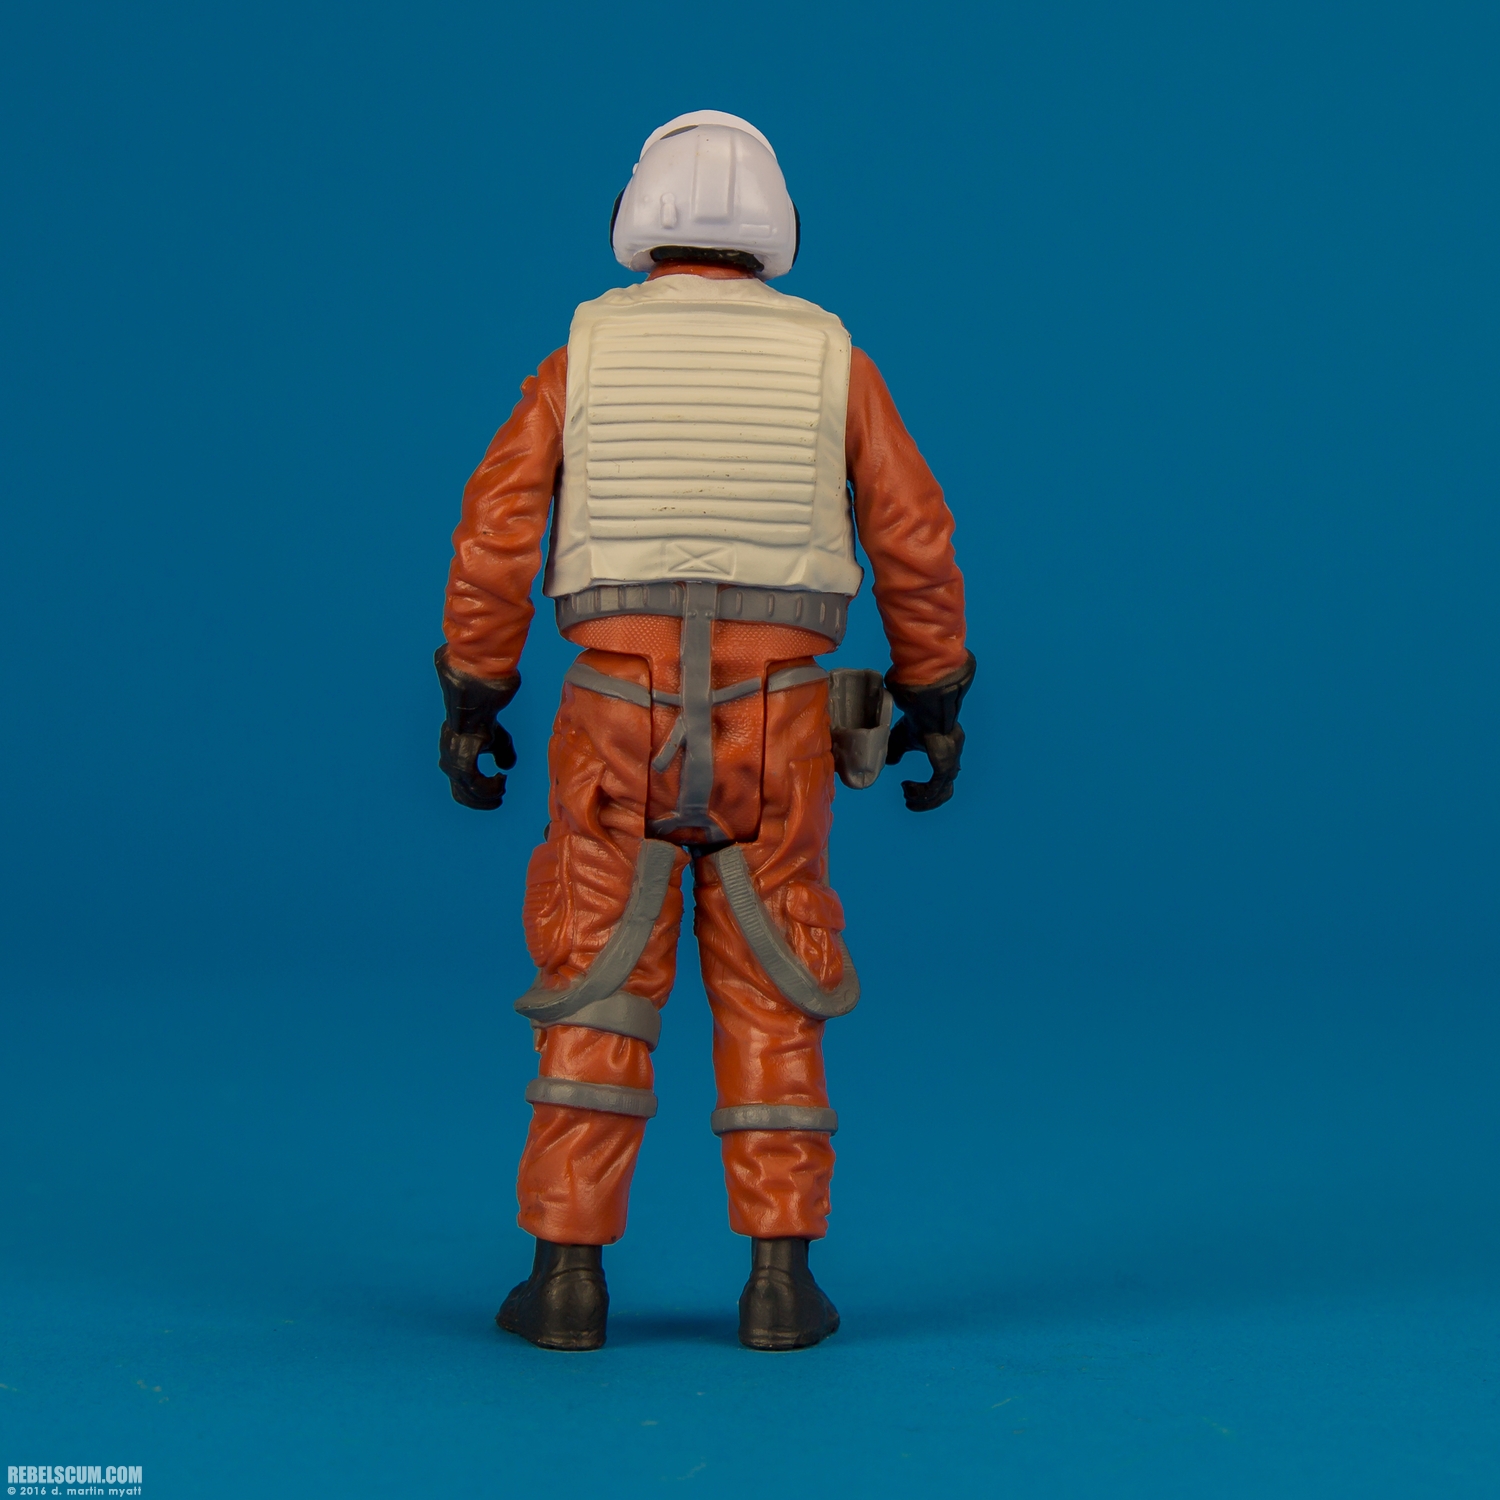 First-Order-Snowtrooper-Officer-Snap-Wexley-The-Force-Awakens-004.jpg